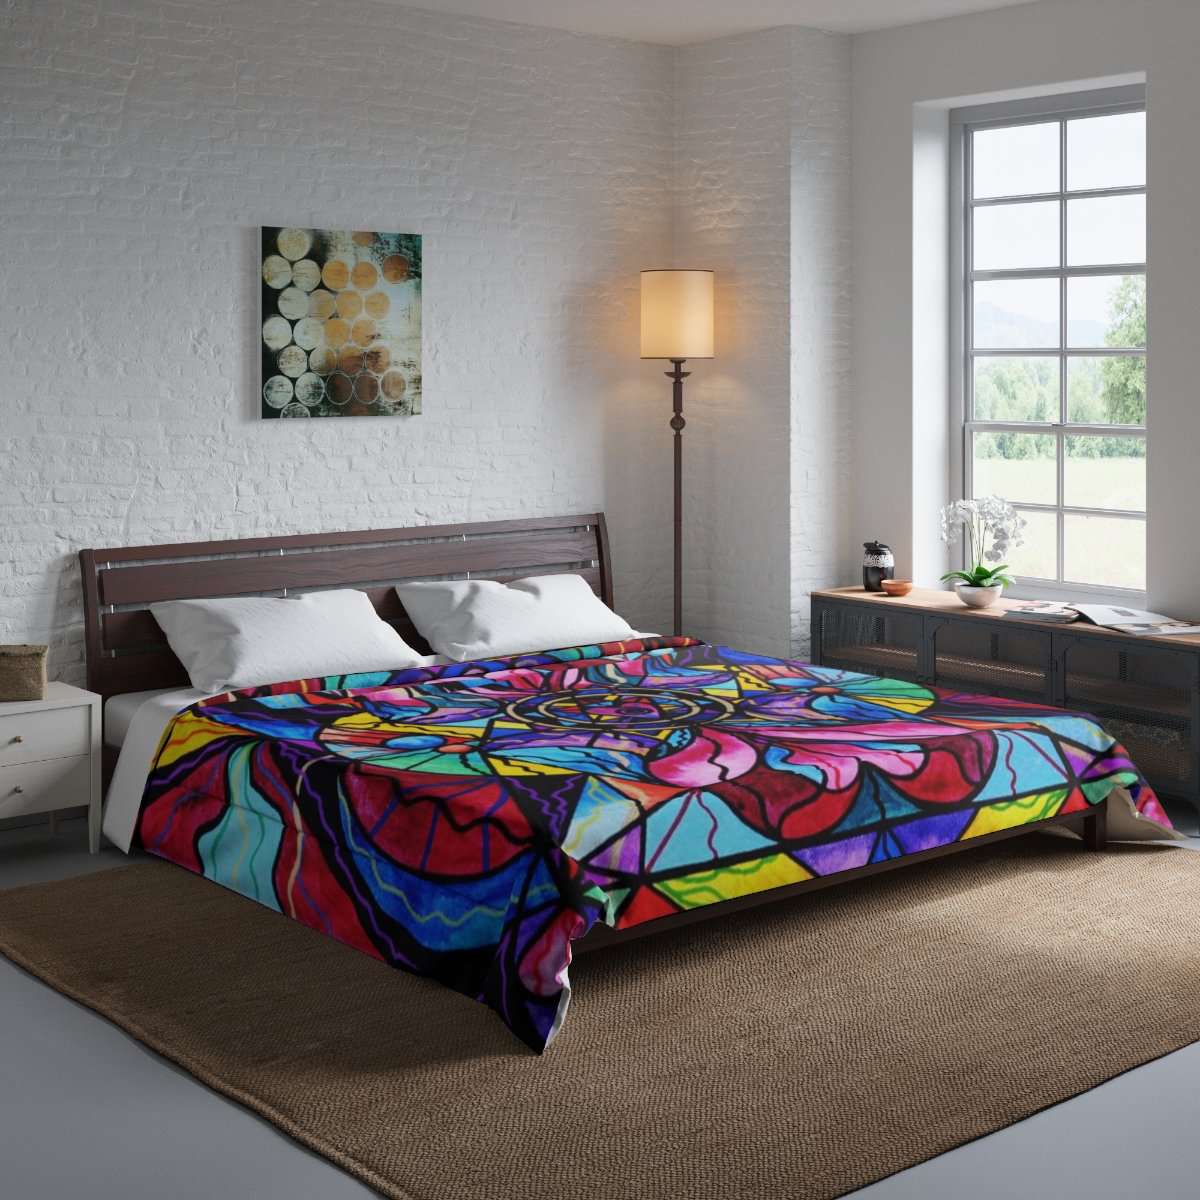 we-offer-the-best-prices-on-the-best-of-blue-ray-self-love-grid-comforter-discount_5.jpg